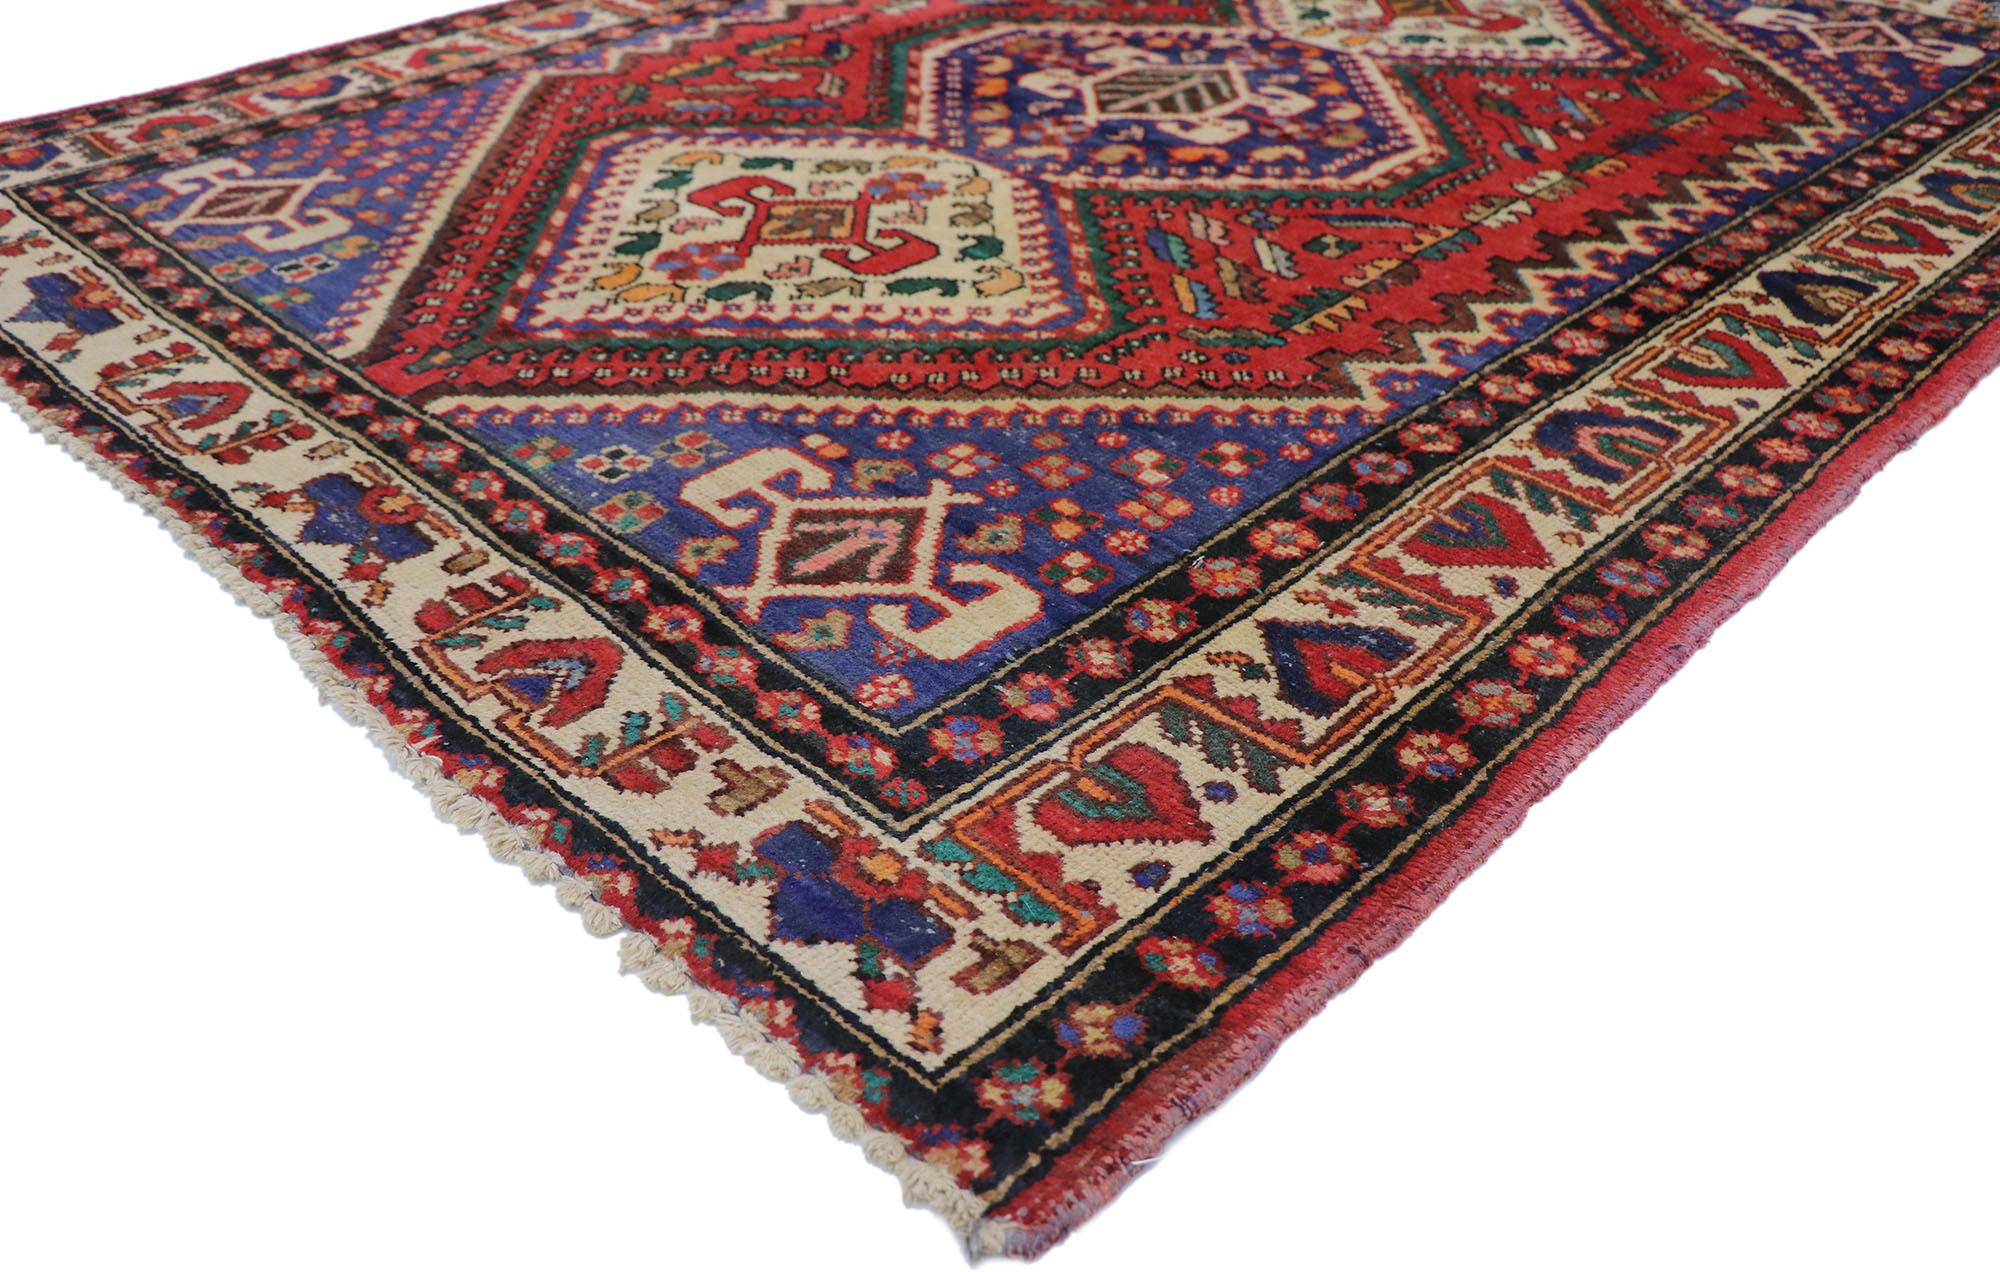 78086 vintage Persian Viss rug with Tribal style 05'04 x 06'08. Balancing tribal style and traditional sensibility with nomadic village charm, this hand knotted wool vintage Persian Viss rug is an amalgam of Caucasian influence. The abrashed red